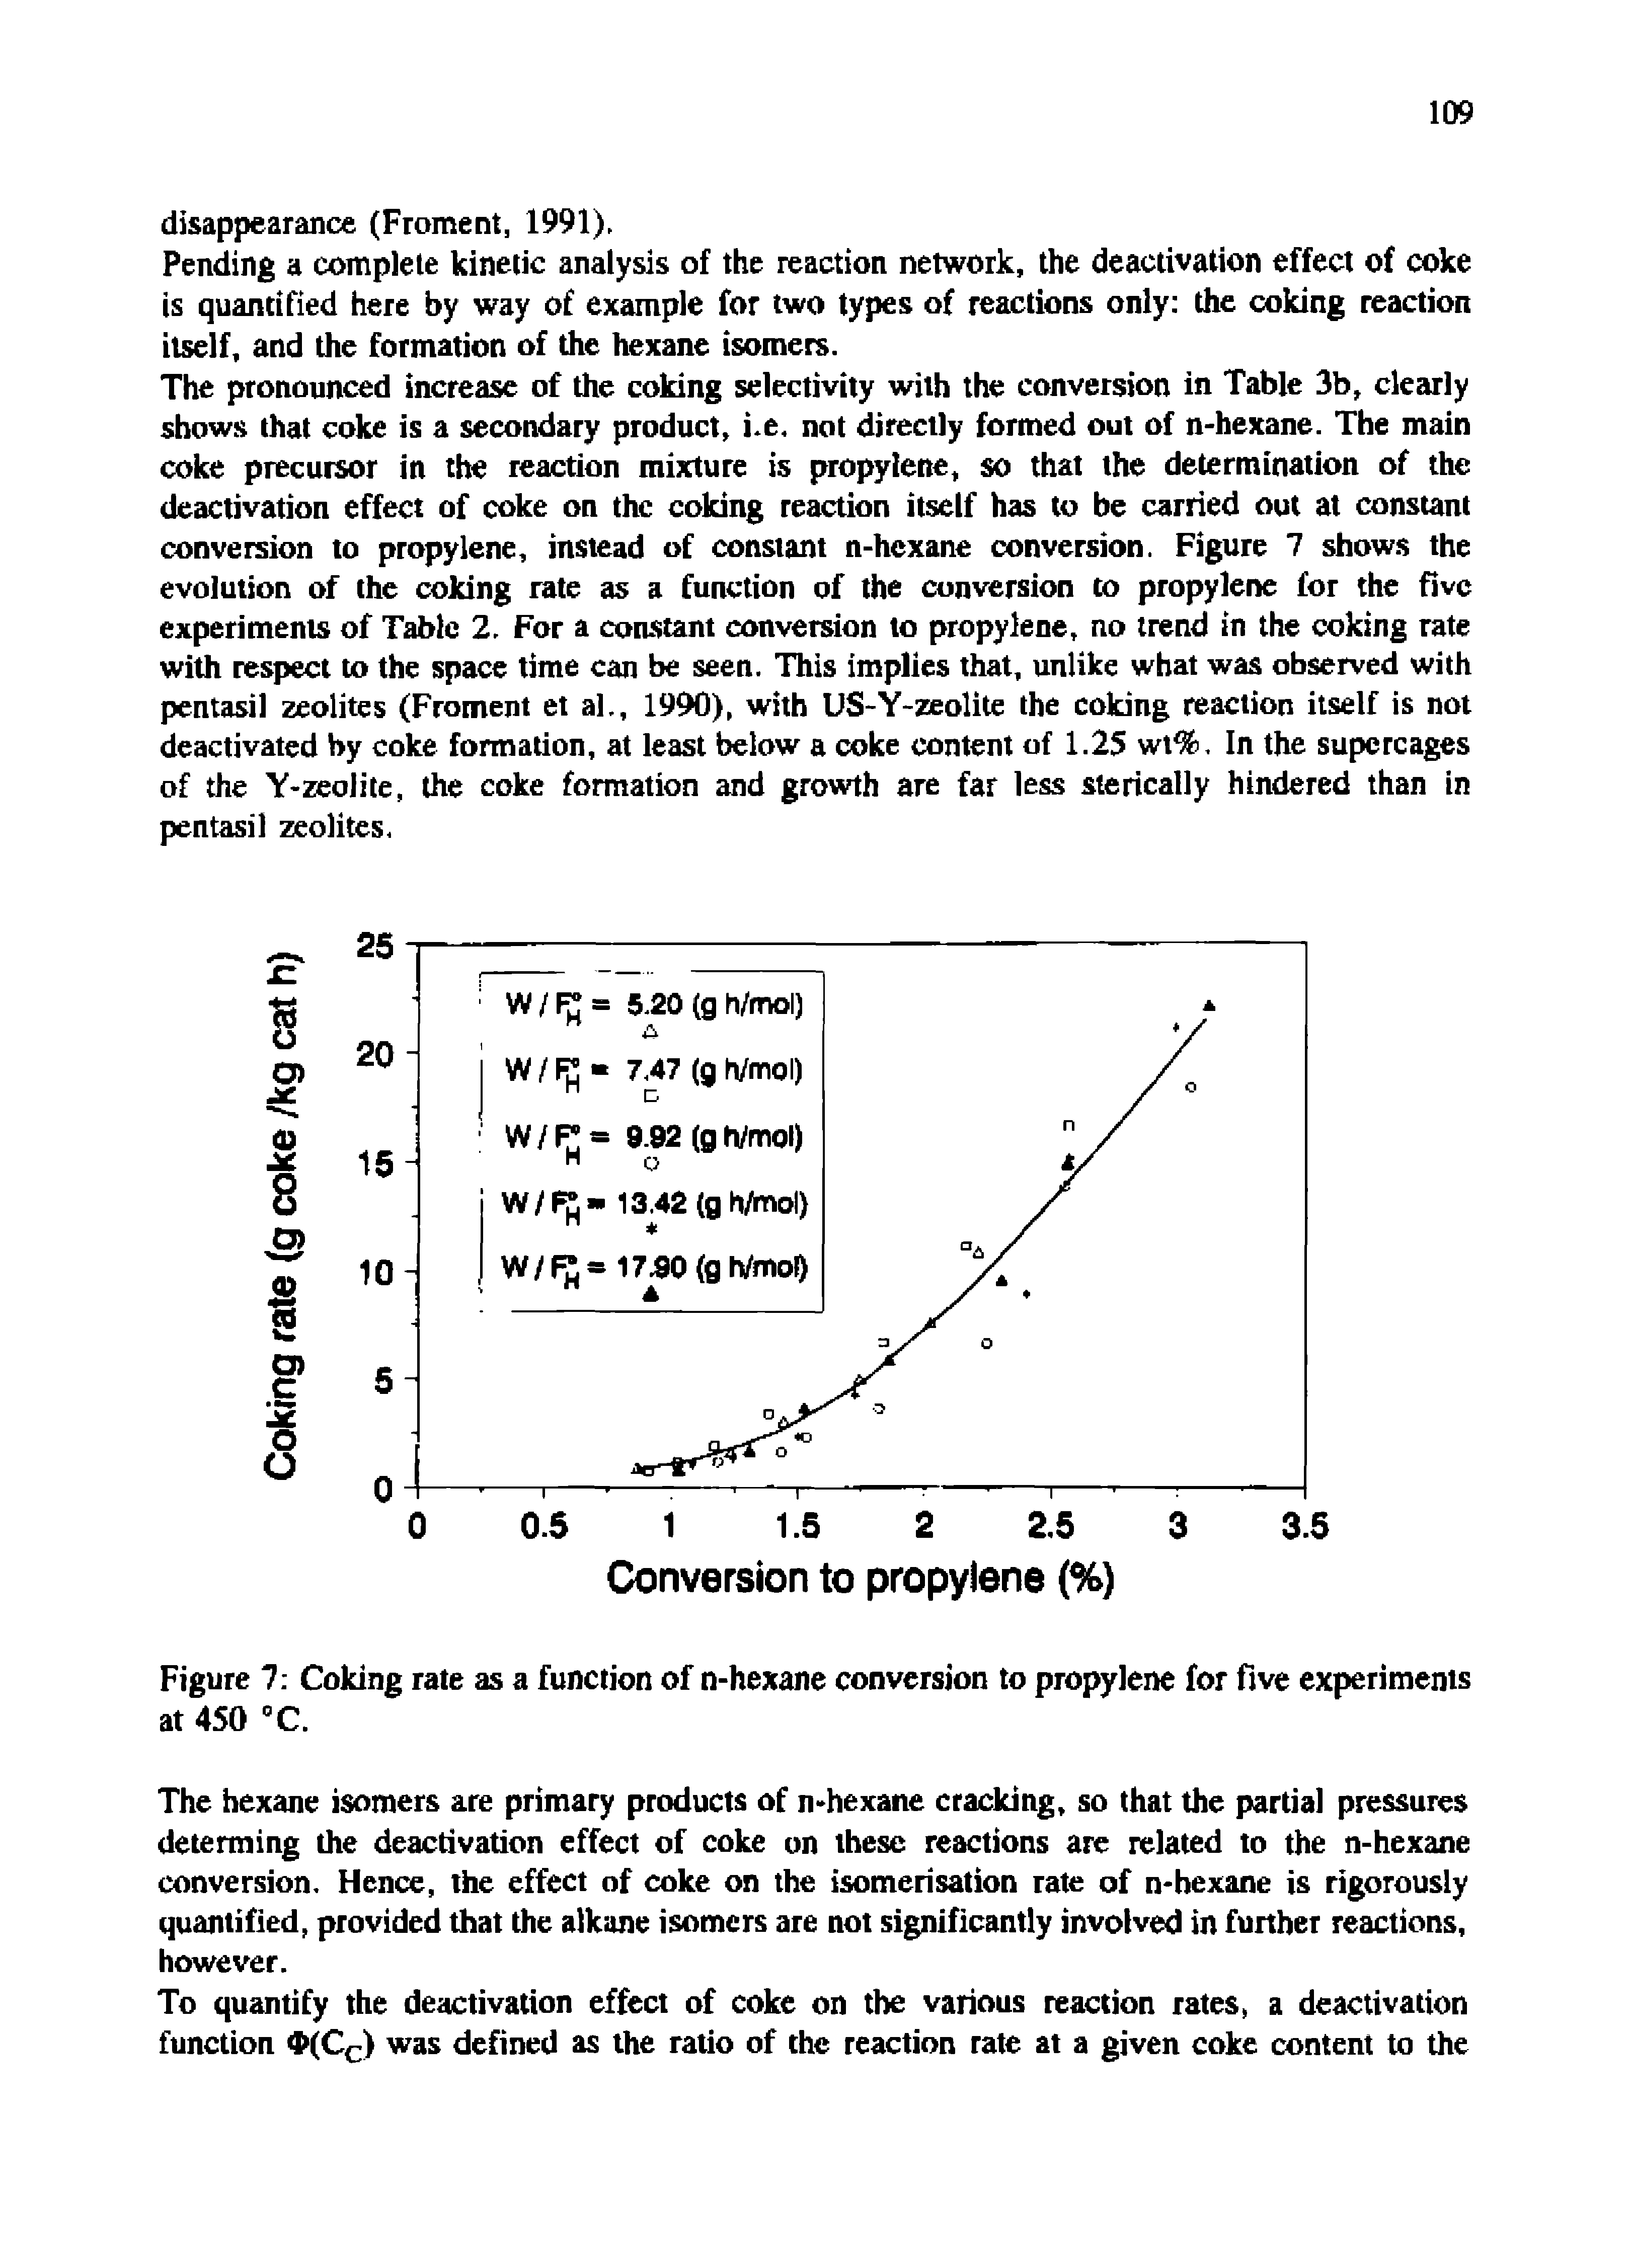 Figure 7 Coking rate as a function of n-hexane conversion to propylene for five experiments at 450 °C.